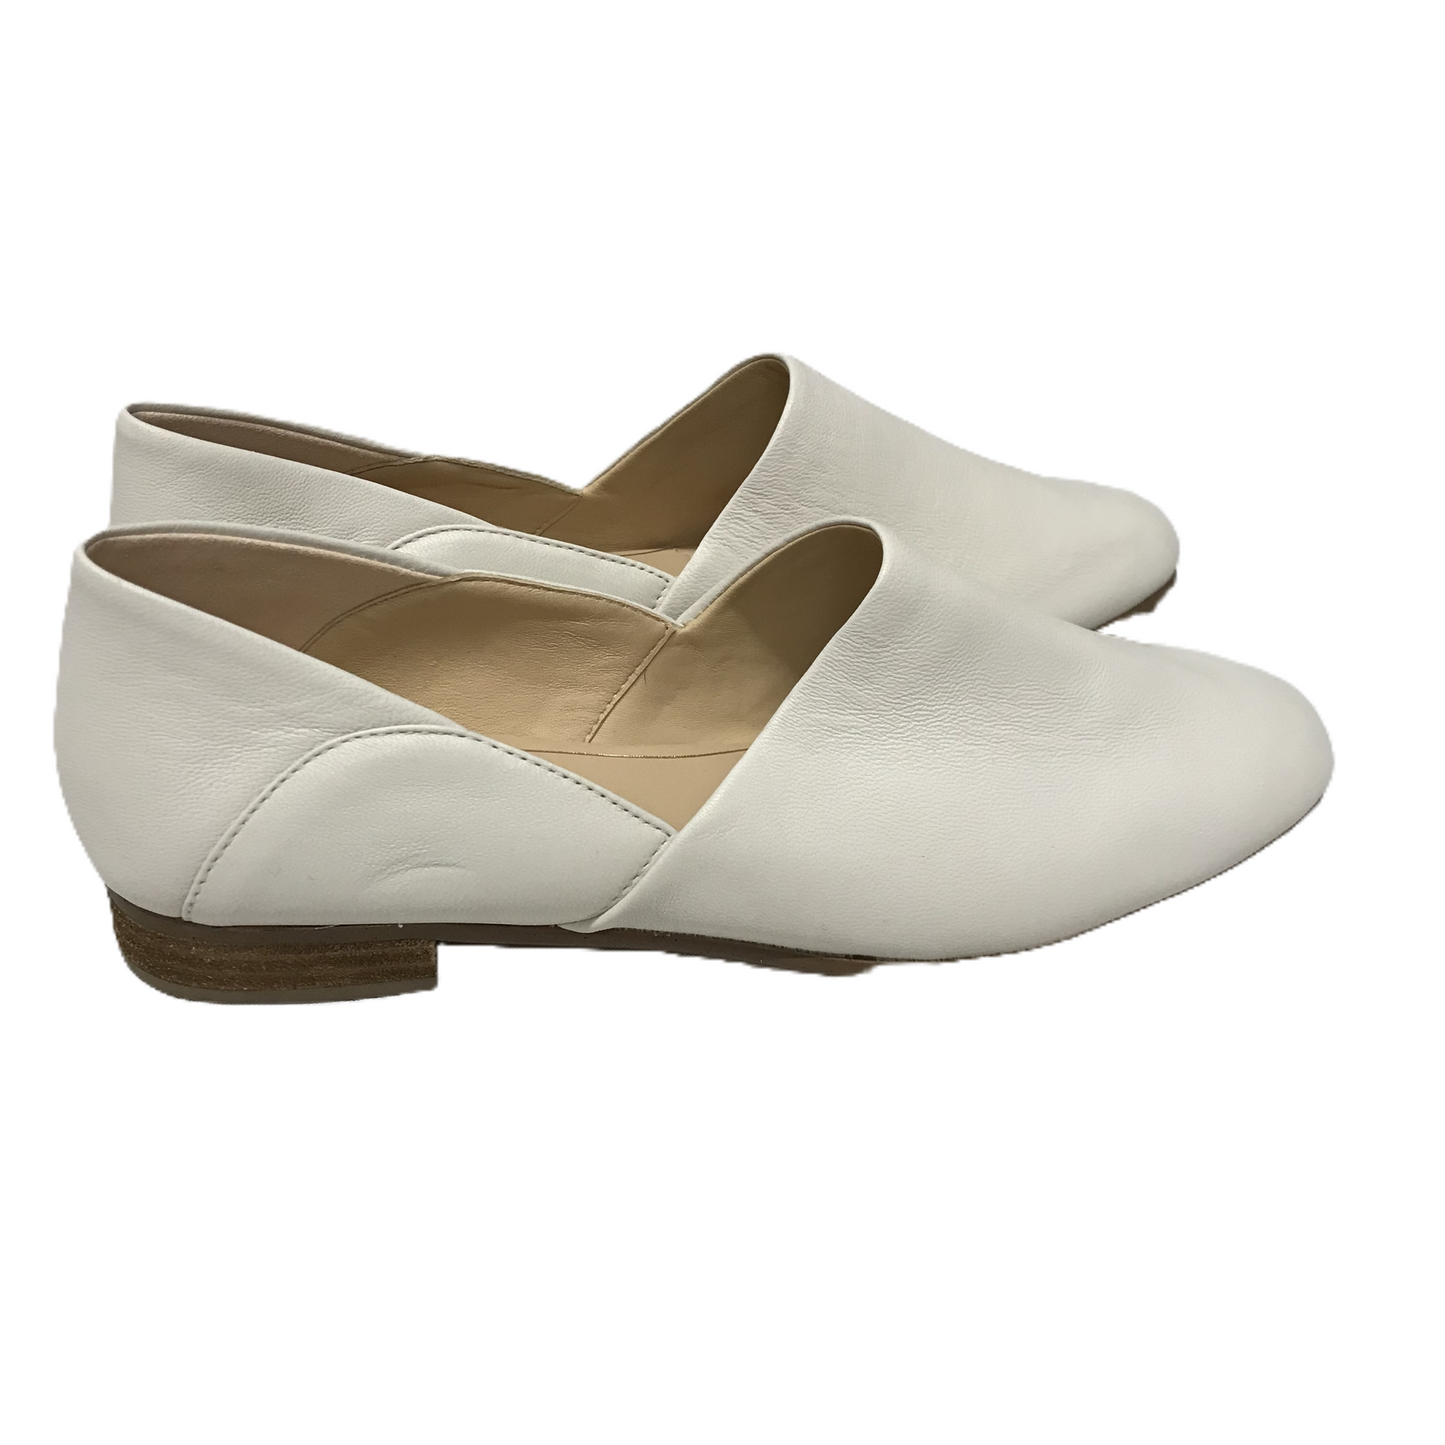 Cream Shoes Flats By Clarks, Size: 9